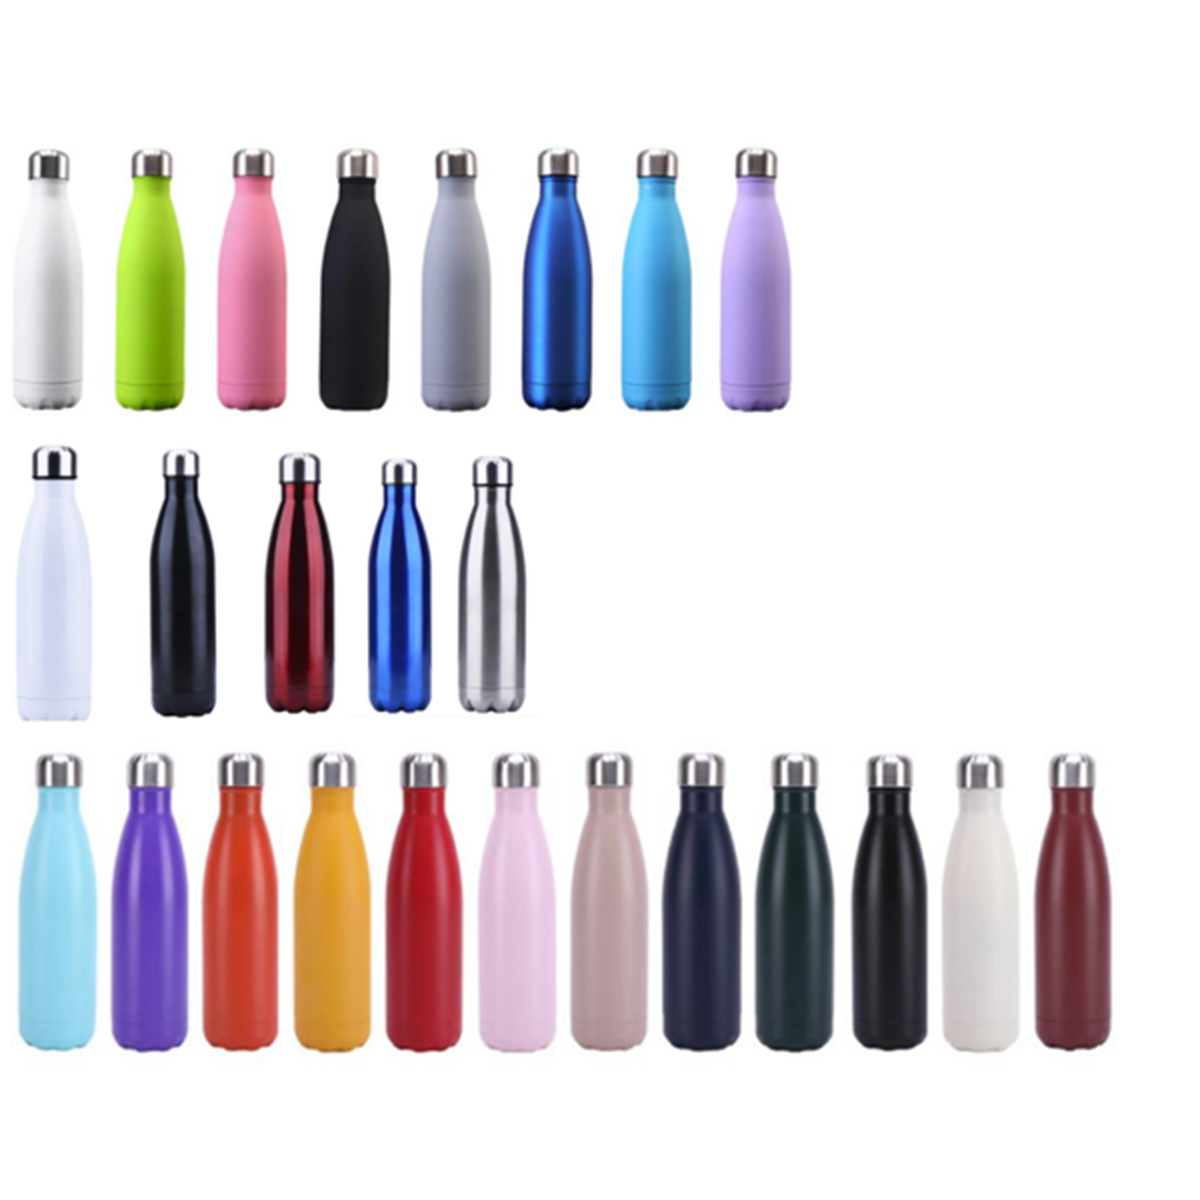 Hot or Cold Stainless Steel Water Bottle